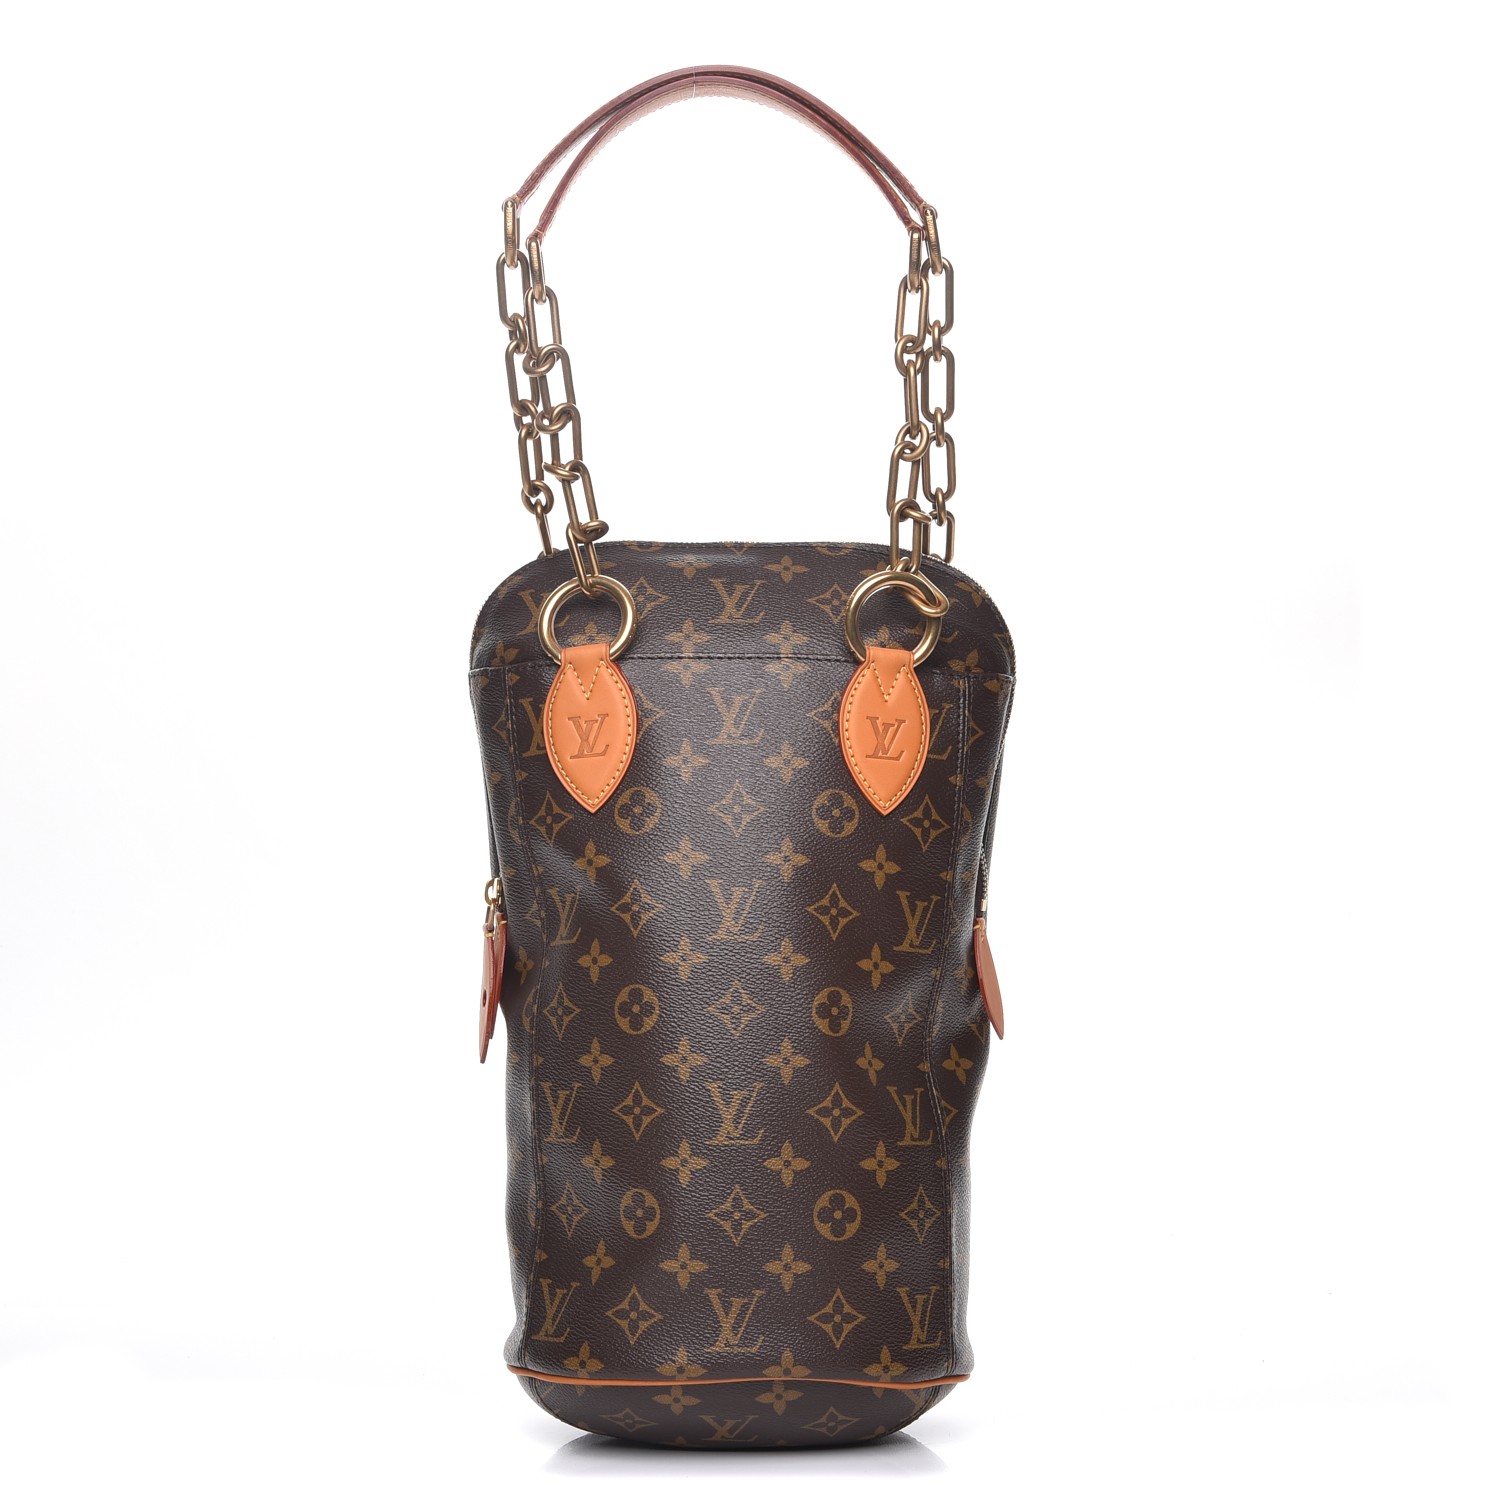 Louis Vuitton: The Iconoclasts